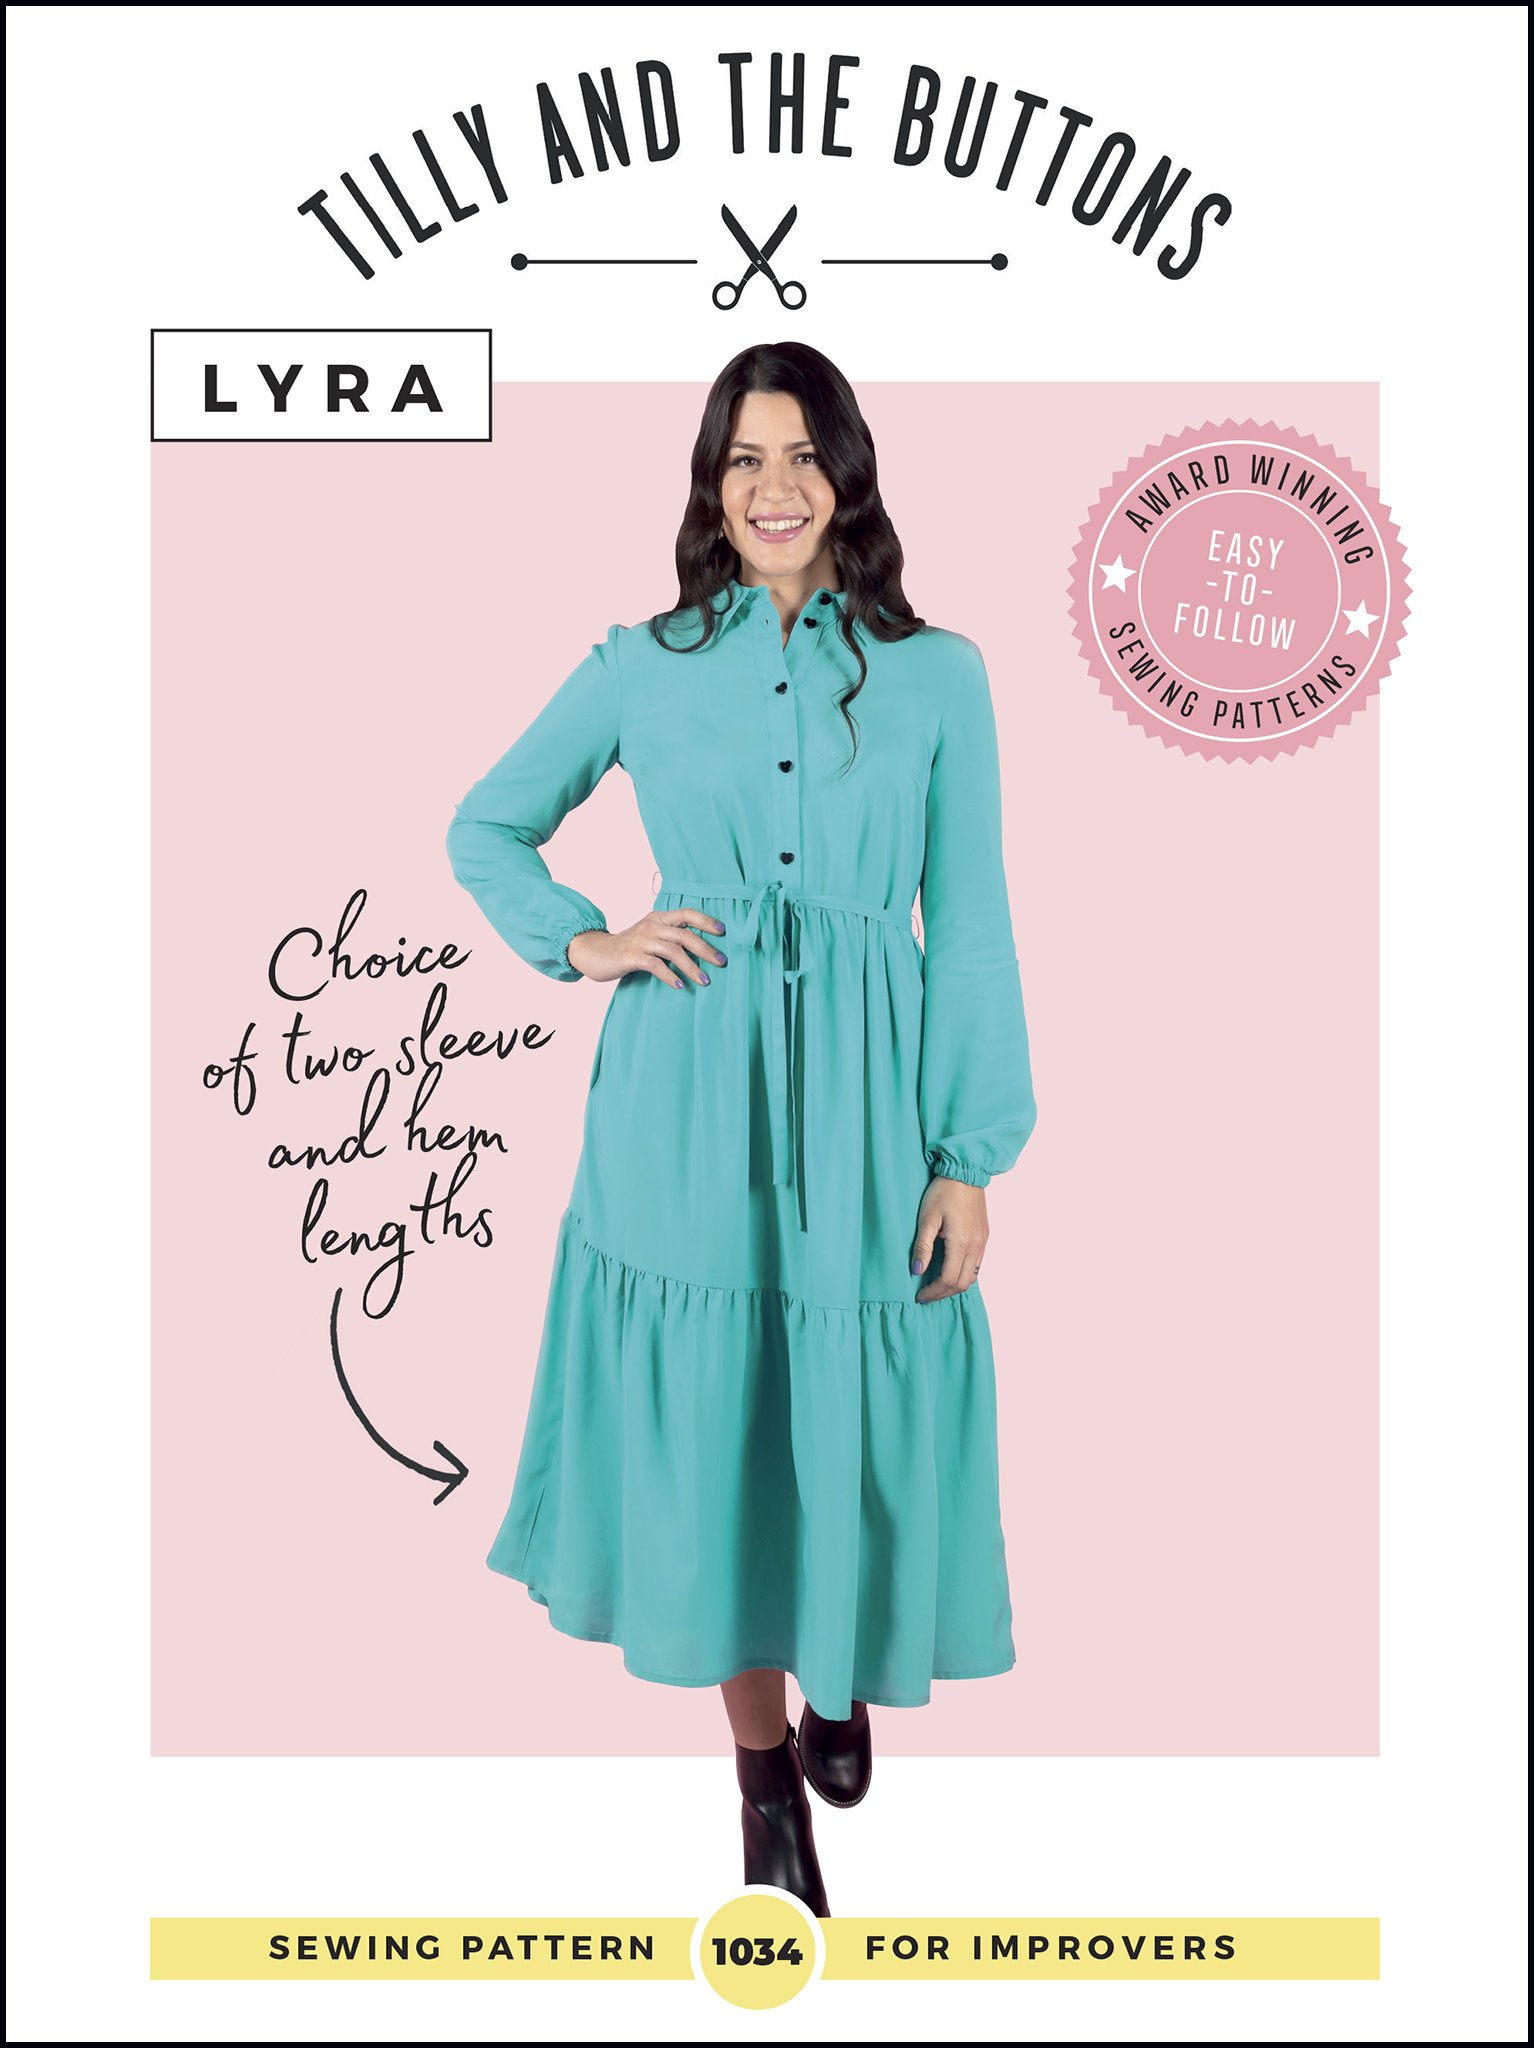 Sew a Shirt Dress - Lyra Dress by Tilly and the Buttons